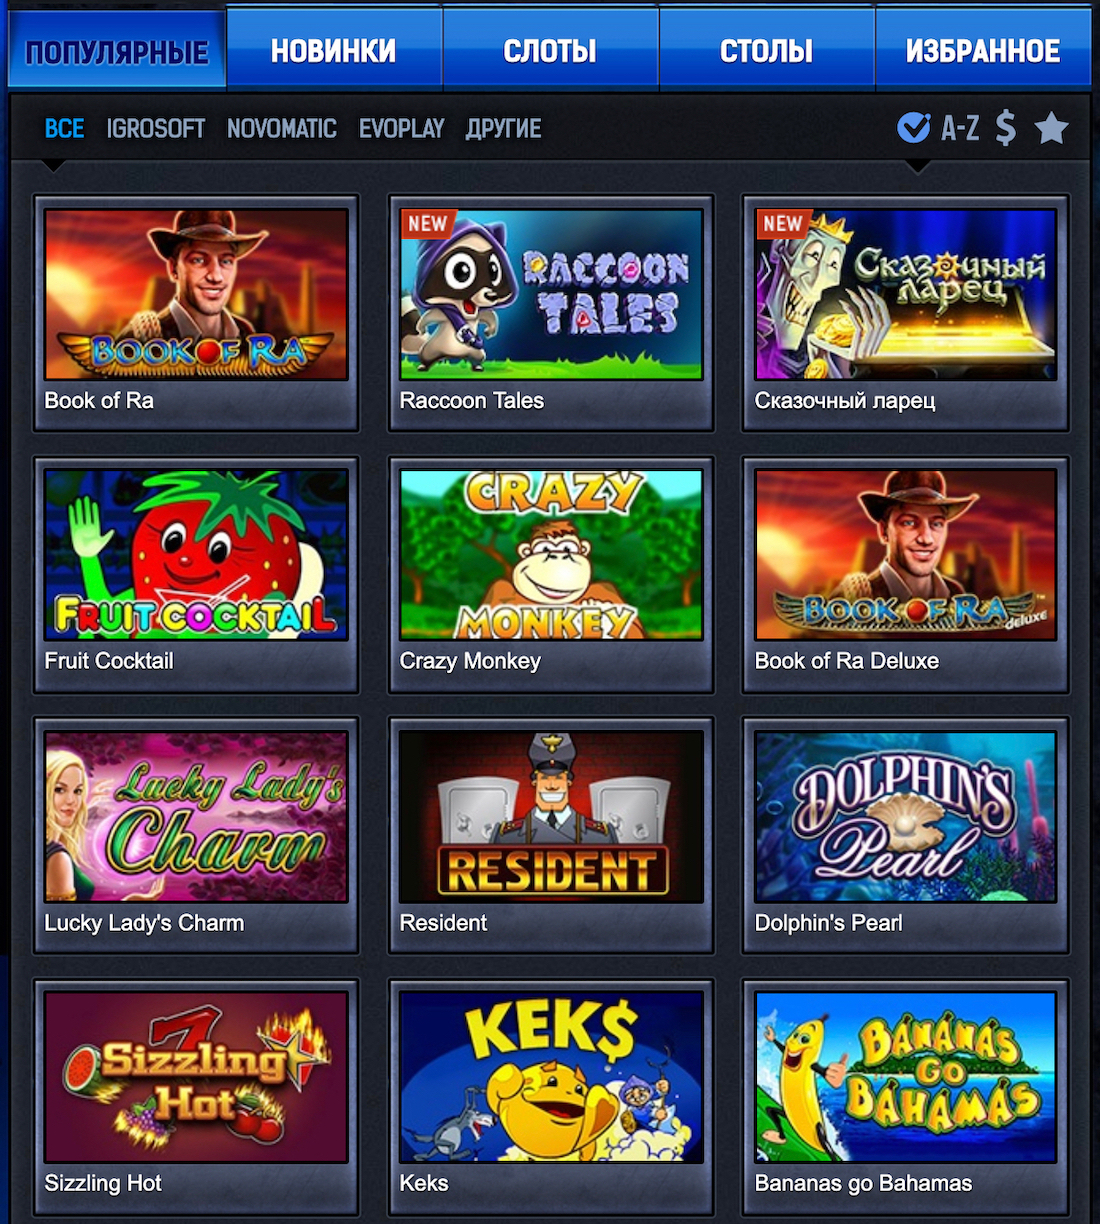 King billy casino review